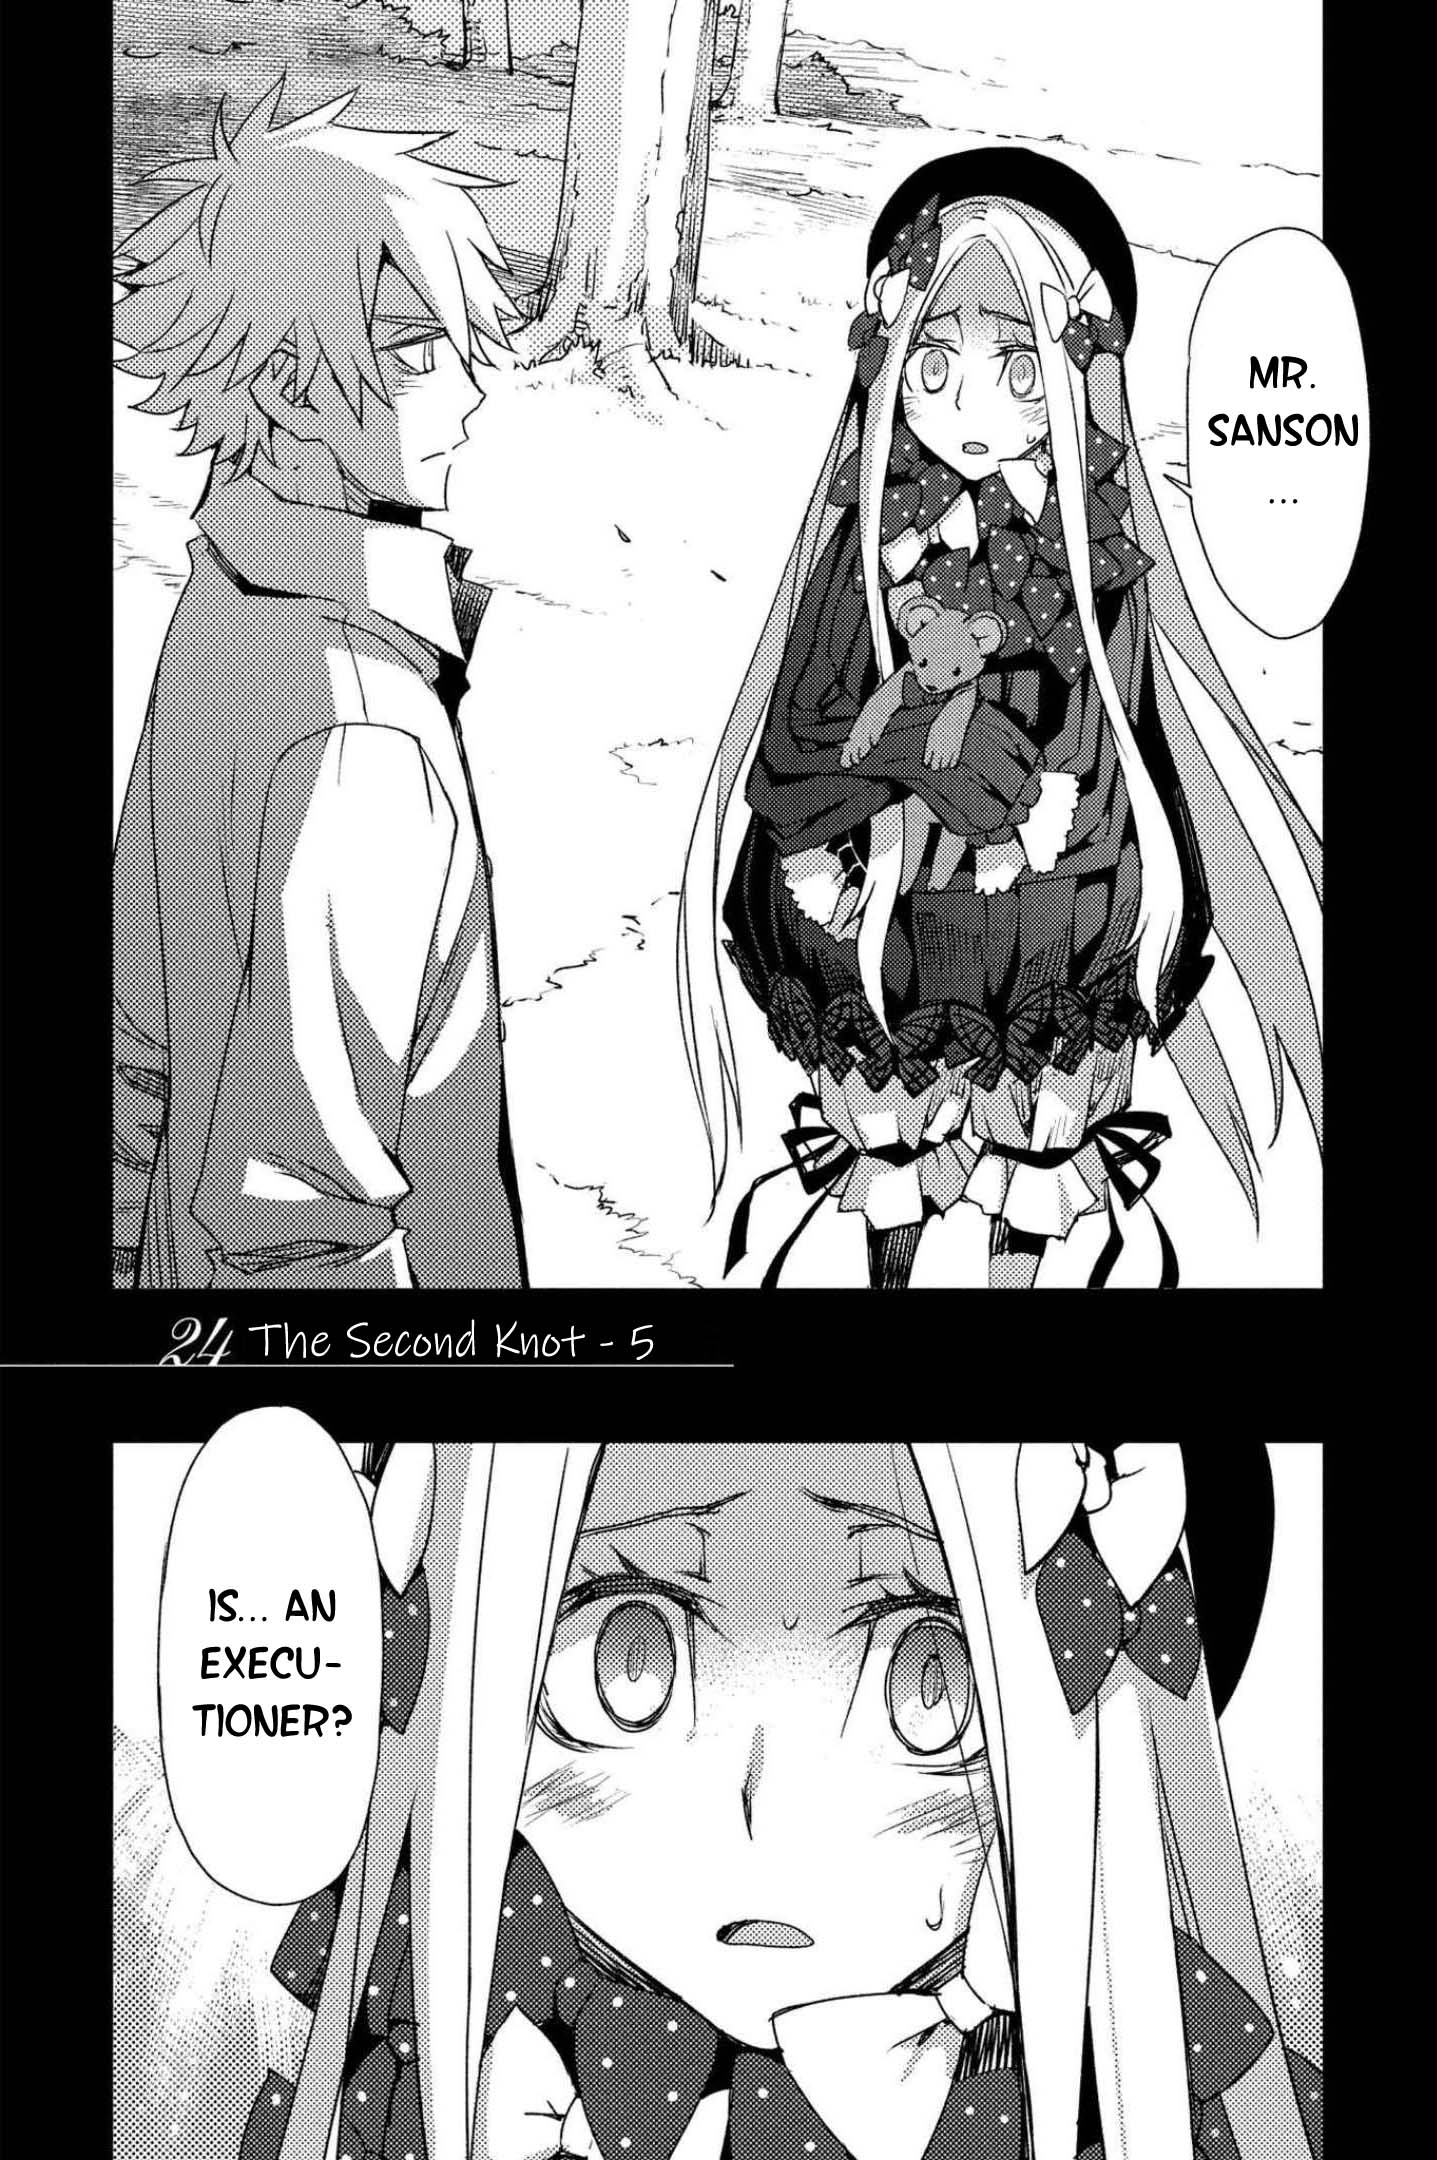 Fate/Grand Order: Epic of Remnant - Subspecies Singularity IV: Taboo Advent Salem: Salem of Heresy - chapter 24 - #1